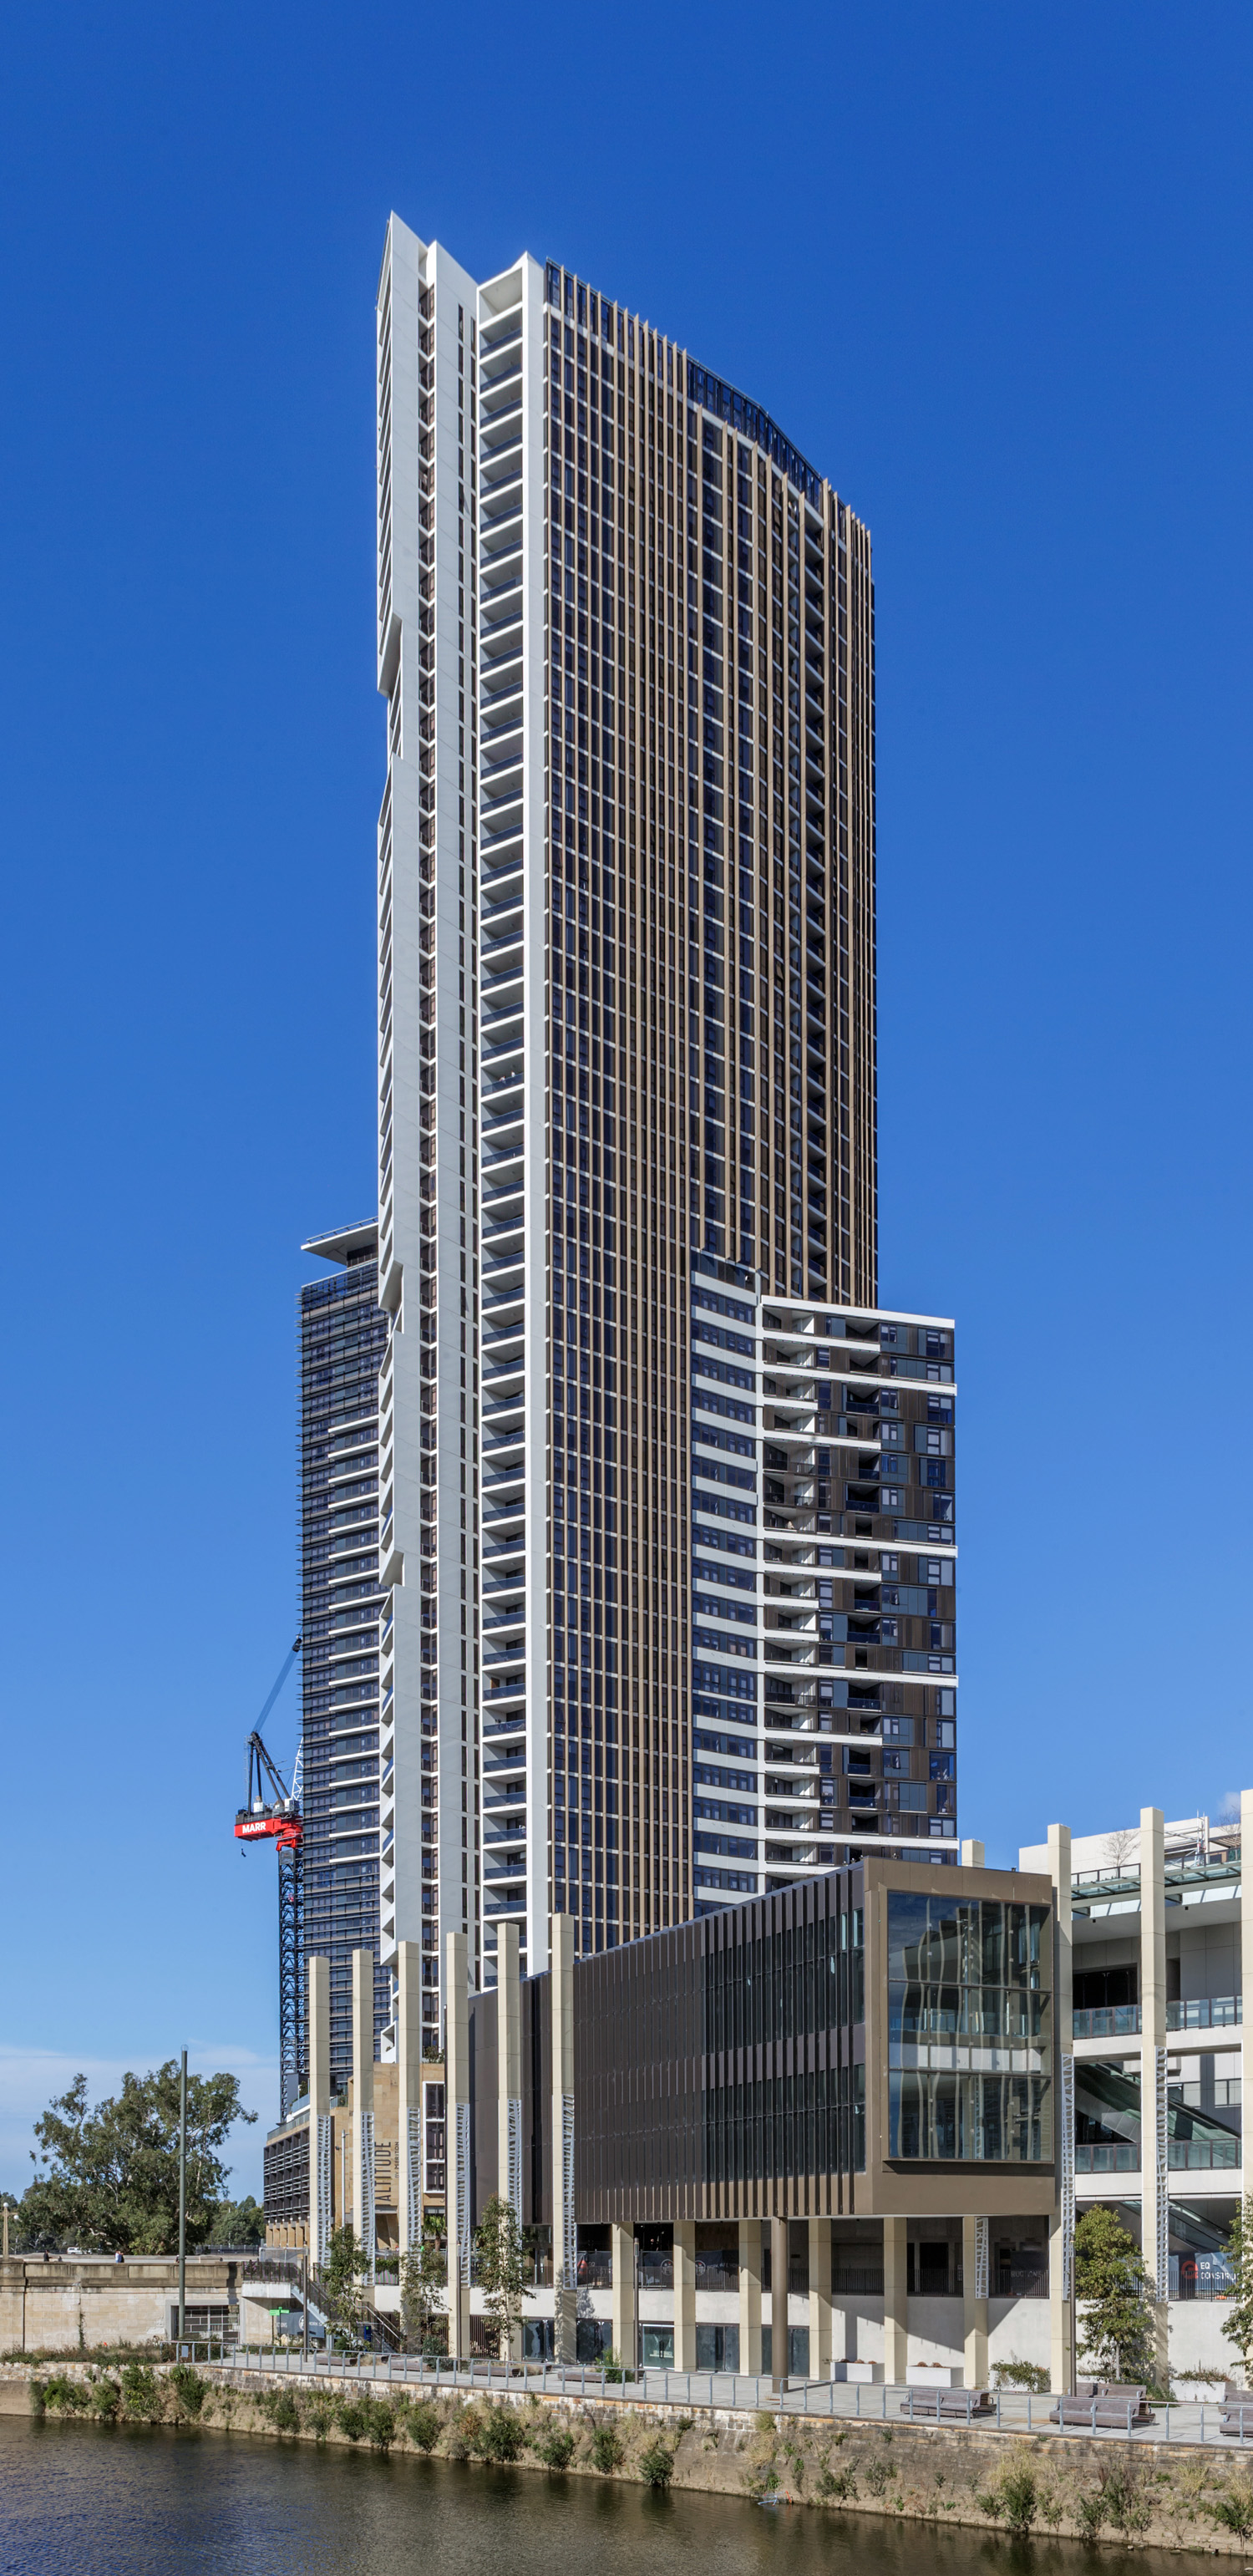 Altitude Apartments Tower A, Parramatta - View from the northwest. © Mathias Beinling